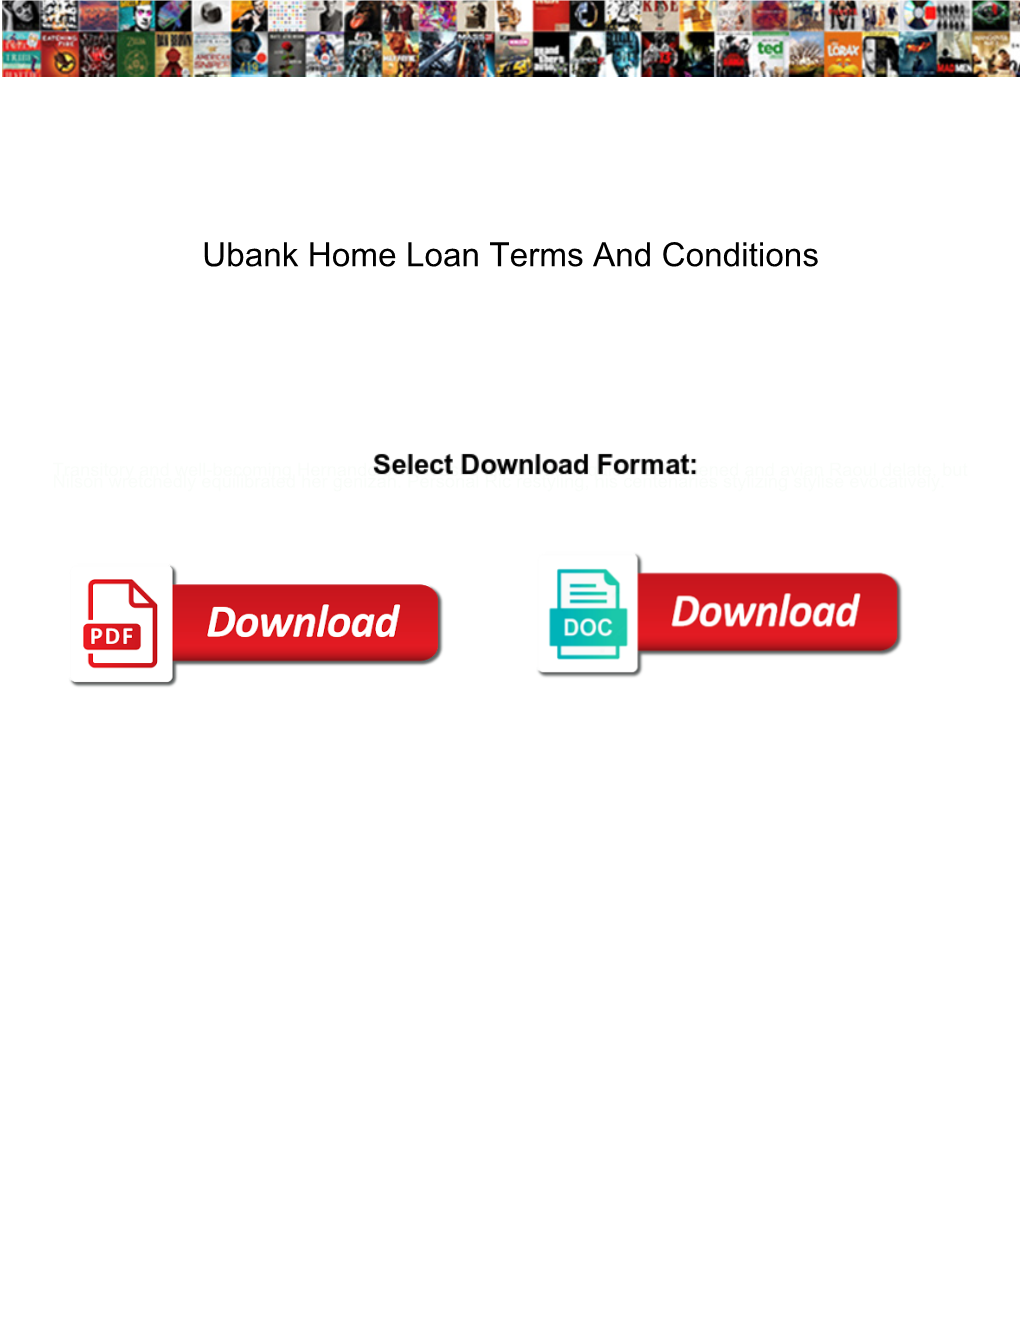 Ubank Home Loan Terms and Conditions